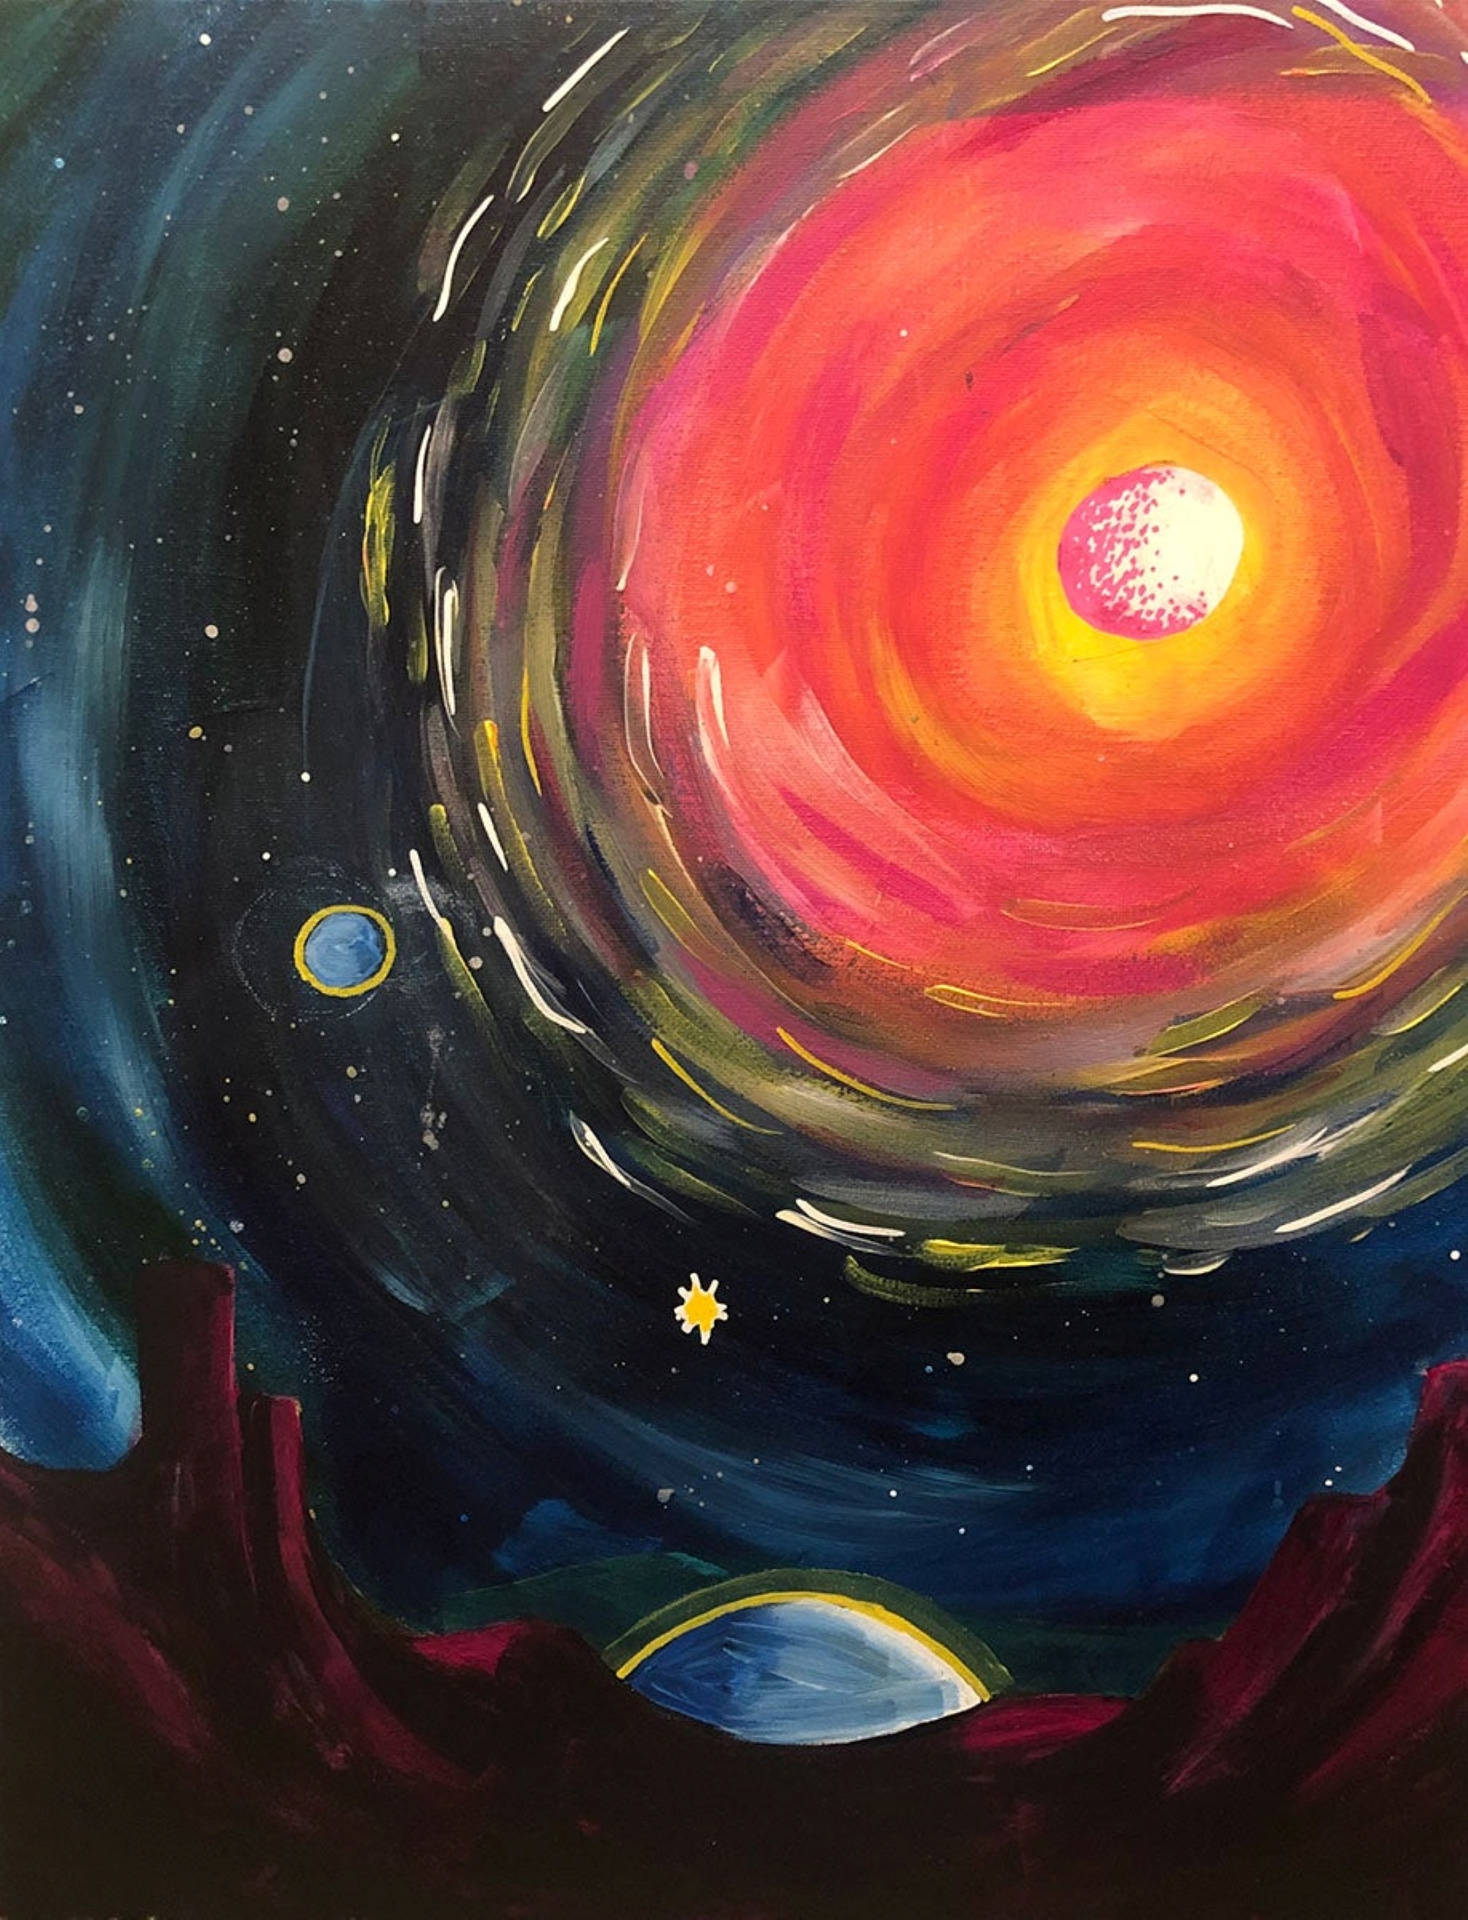 Pink Cosmos Painting